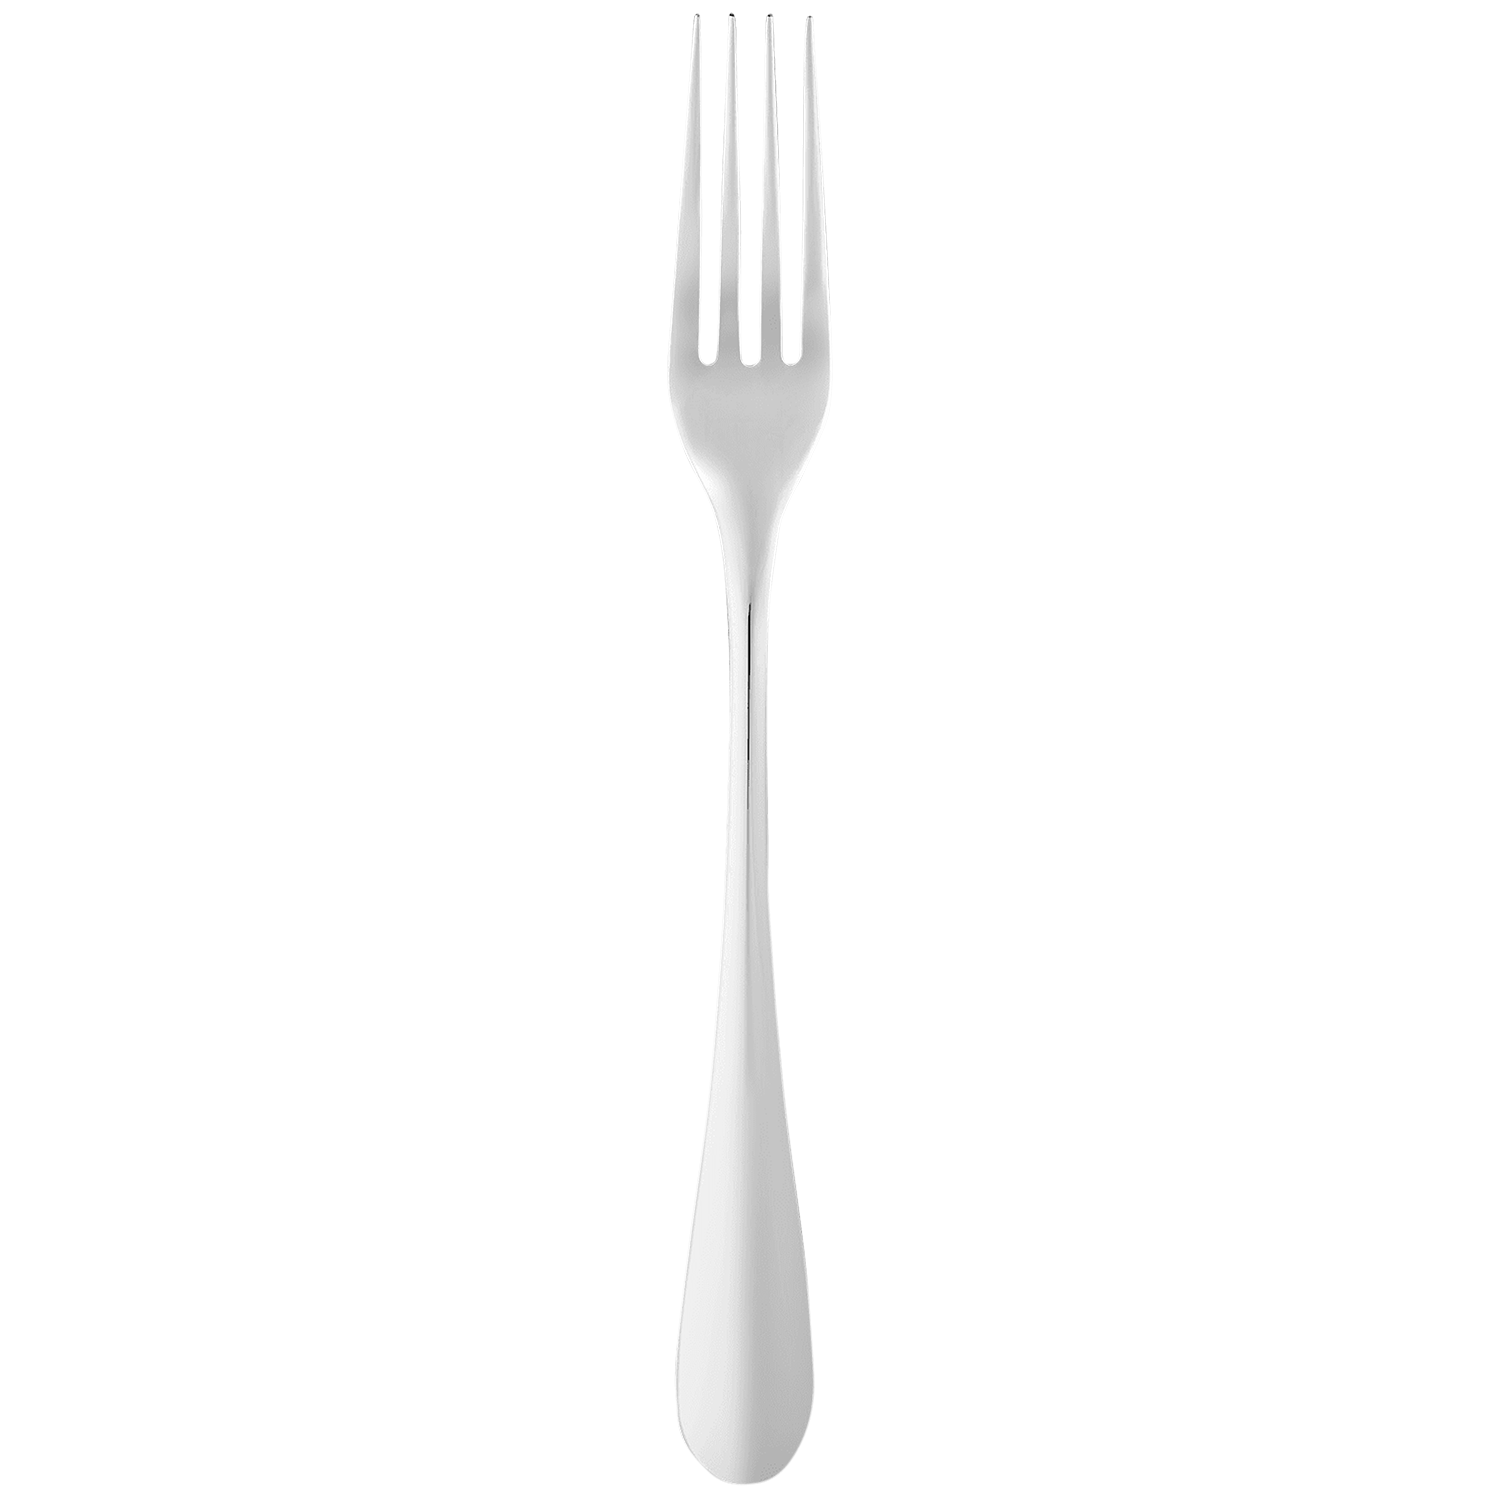 Stainless Steel serving fork